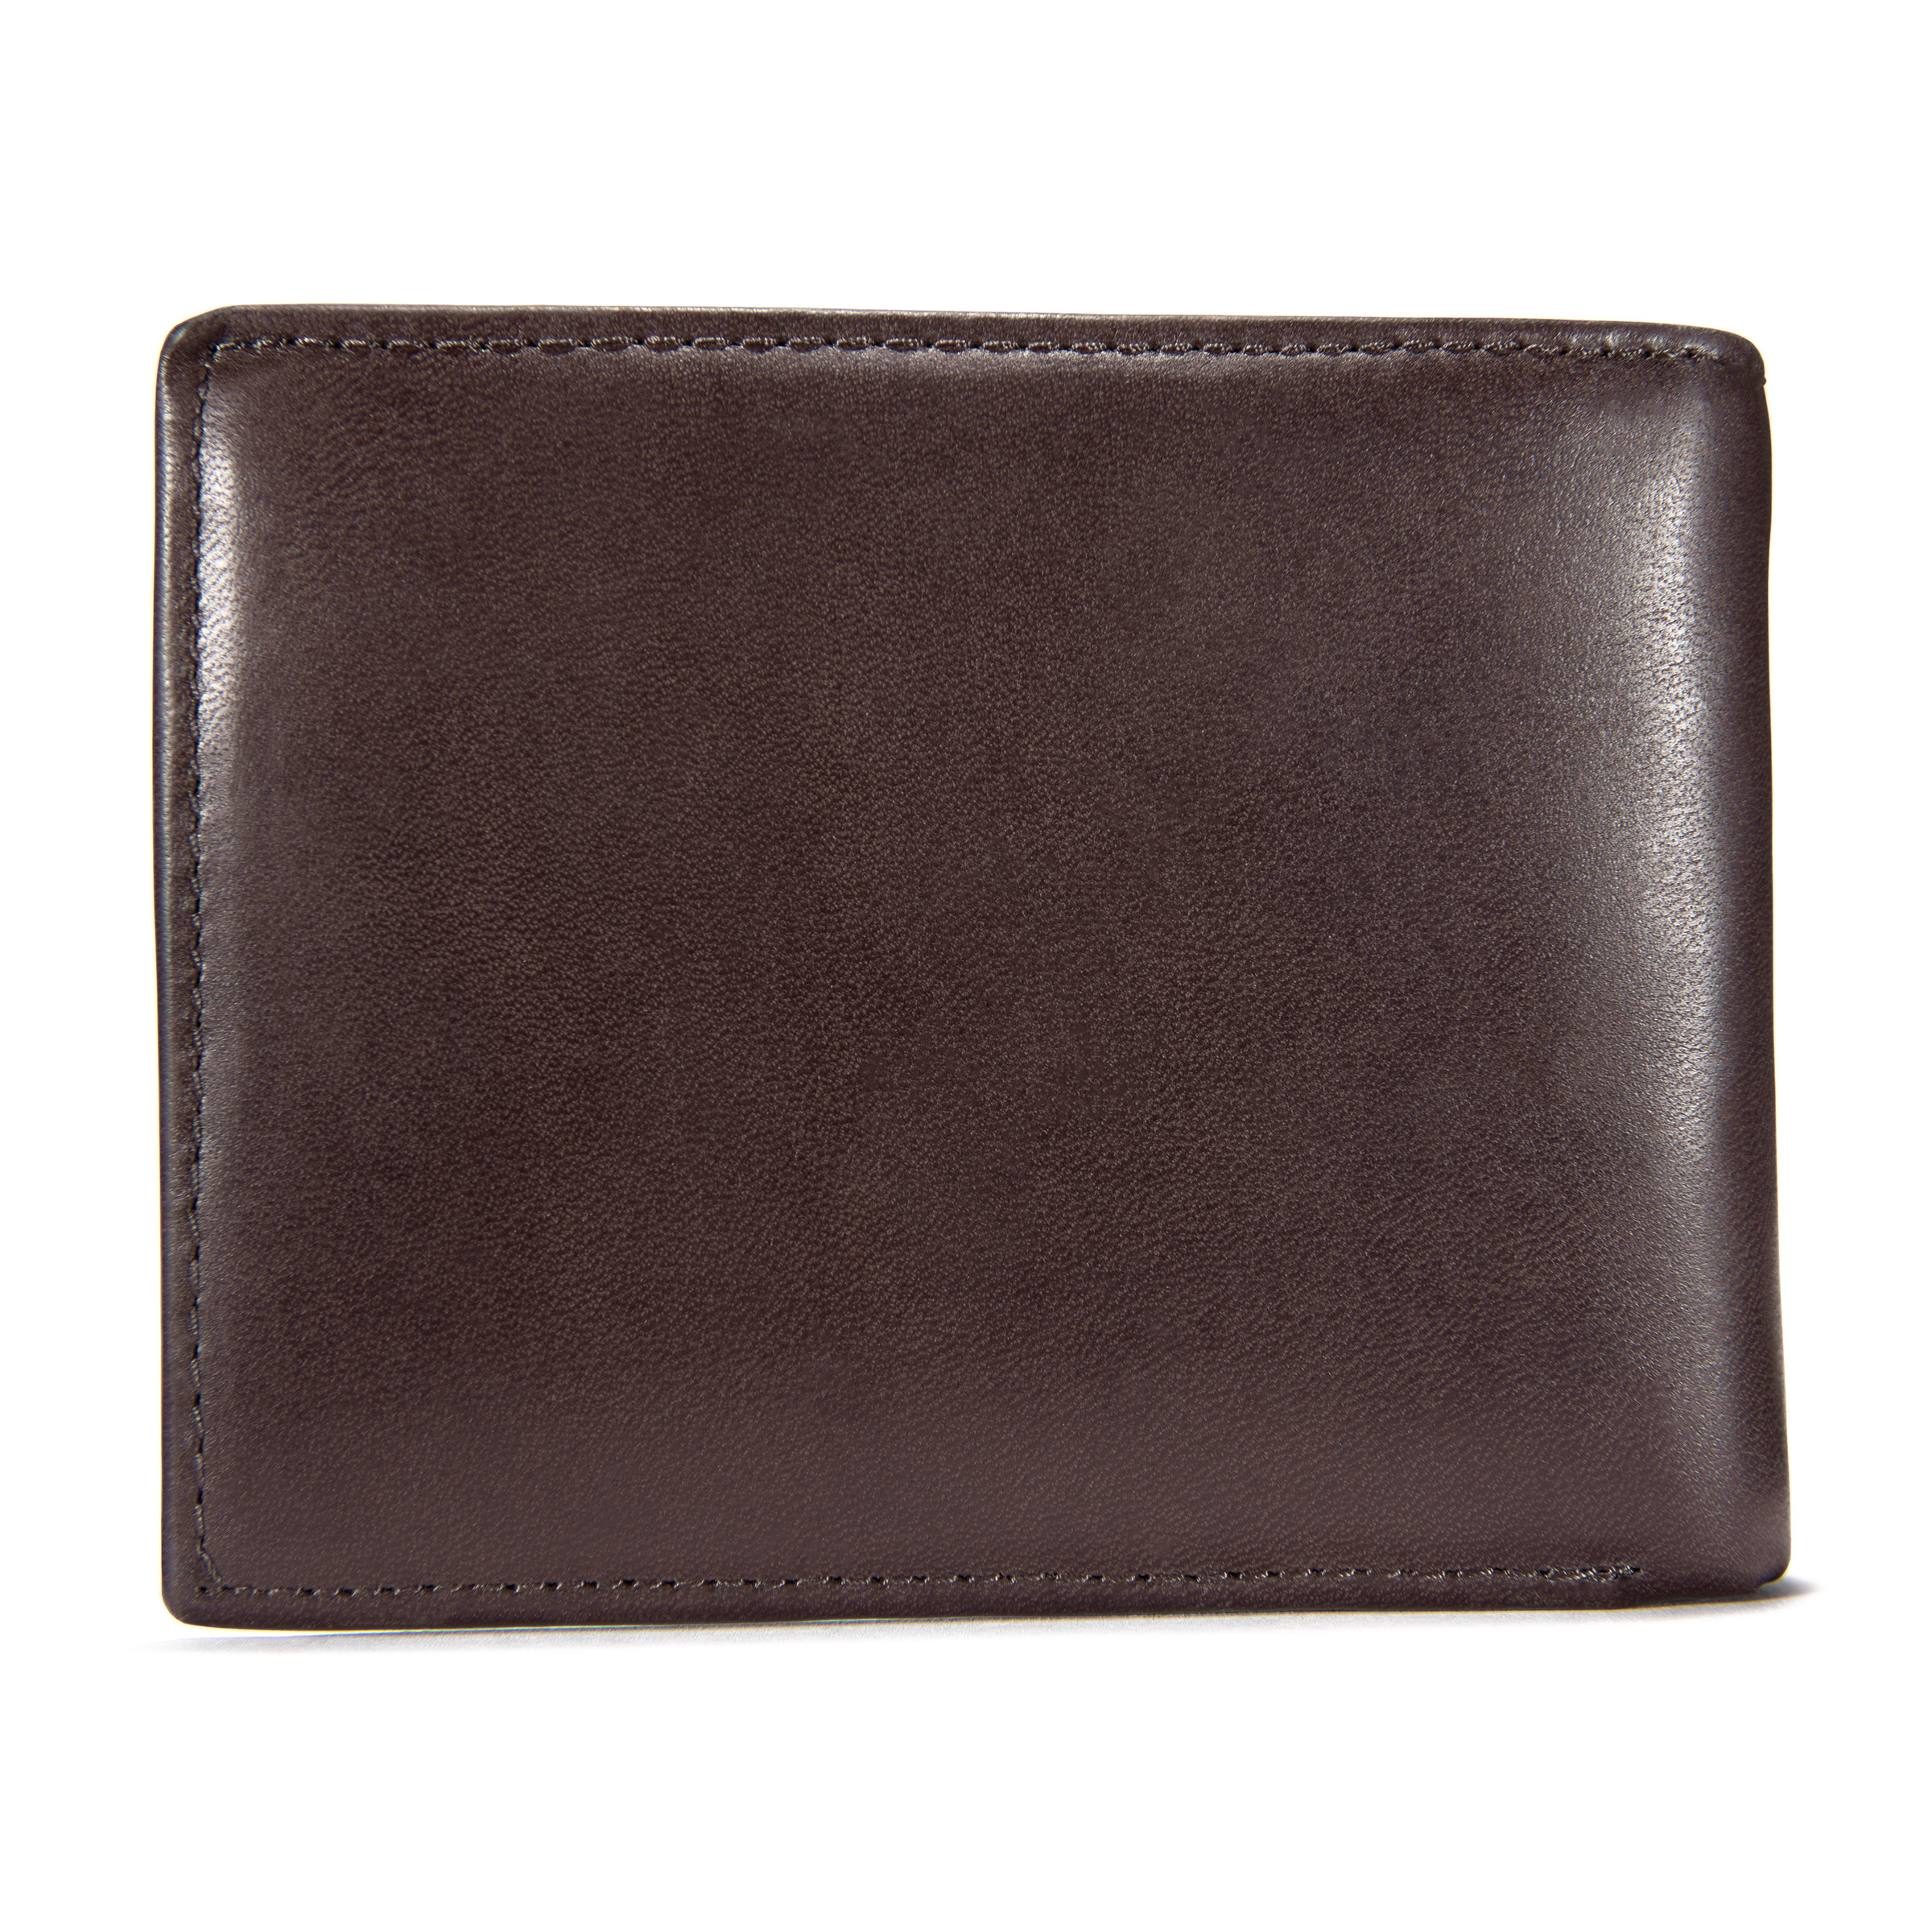 Picture of Carhartt B0000218 Mens Oil Tan Leather Passcase Wallet